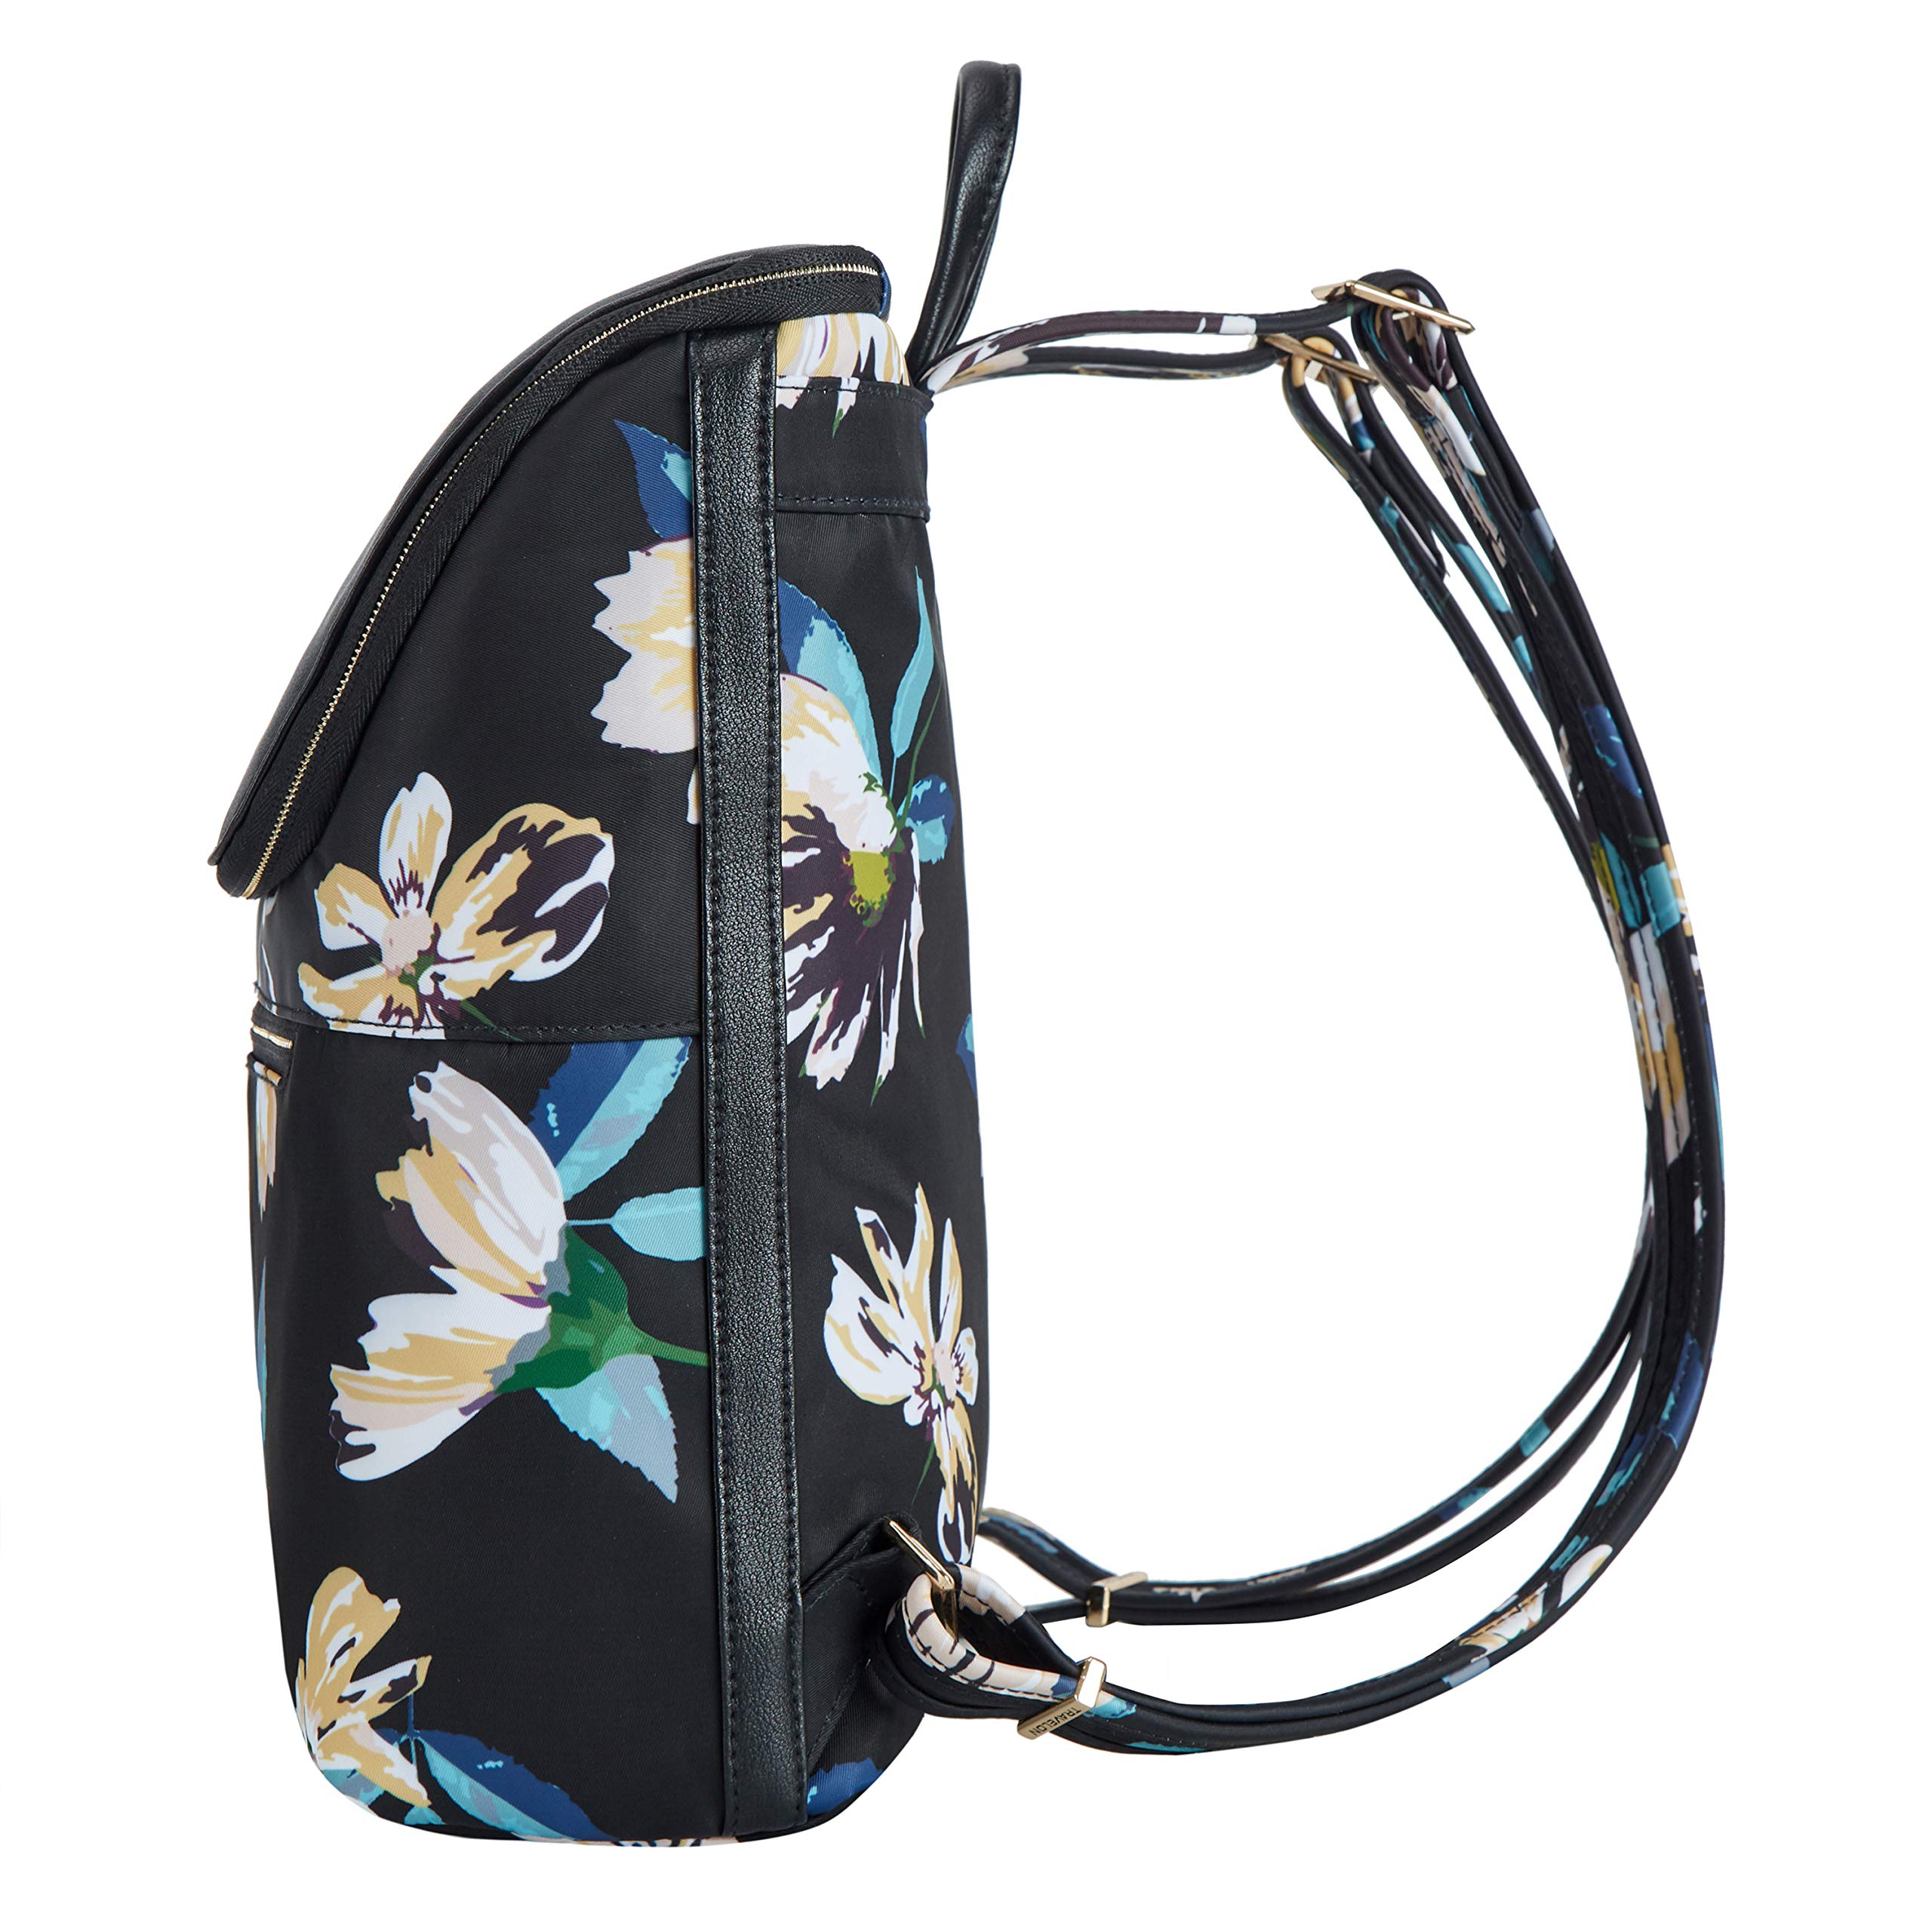 Travelon Addison-Anti-Theft Backpack, Midnight Floral, One Size